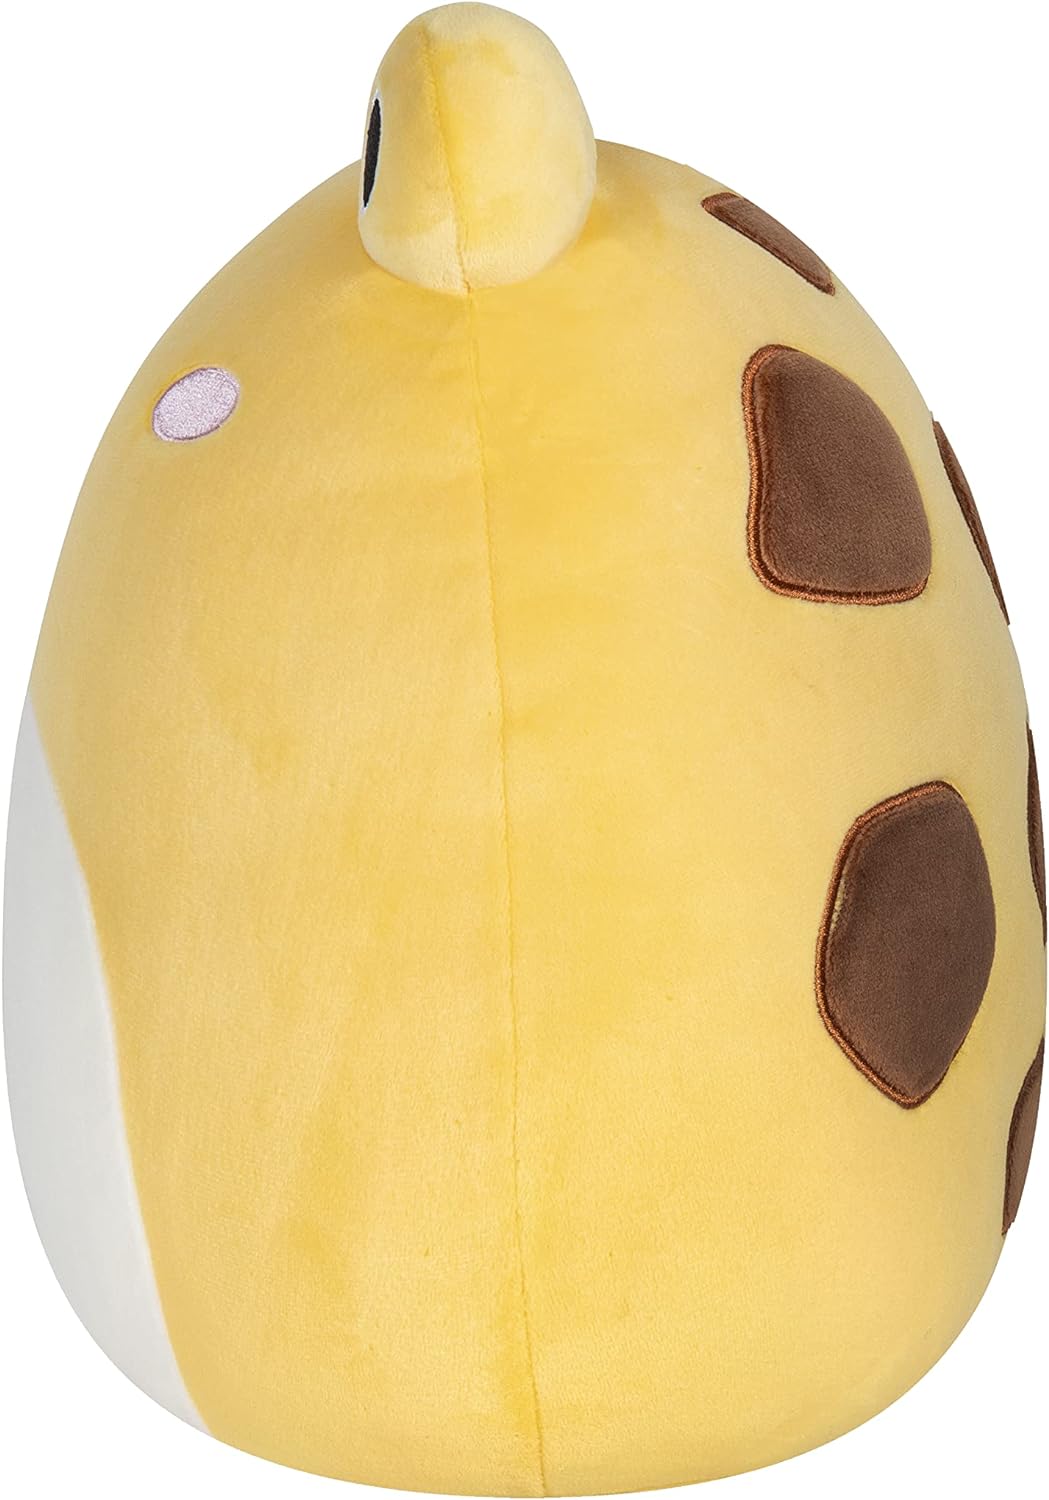 Squishmallows 12 inch Leigh YELLOW TOAD Super Soft Plush